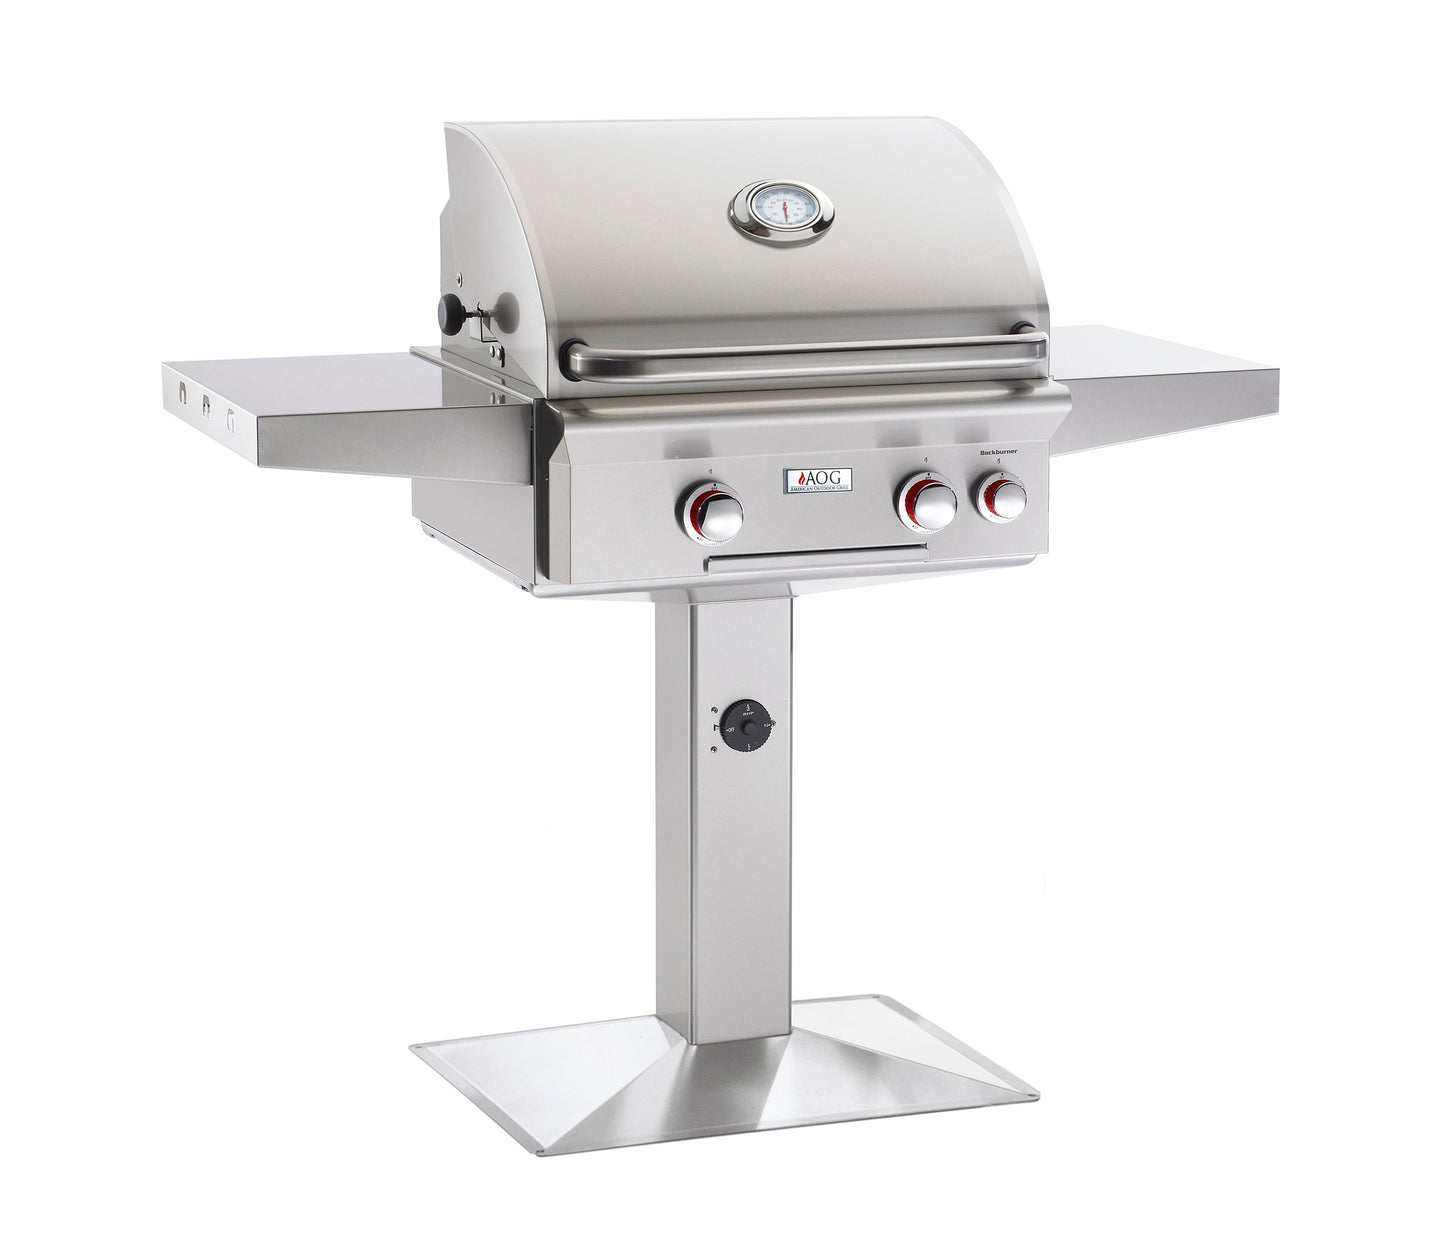 AOG T Series Post Mount Grill